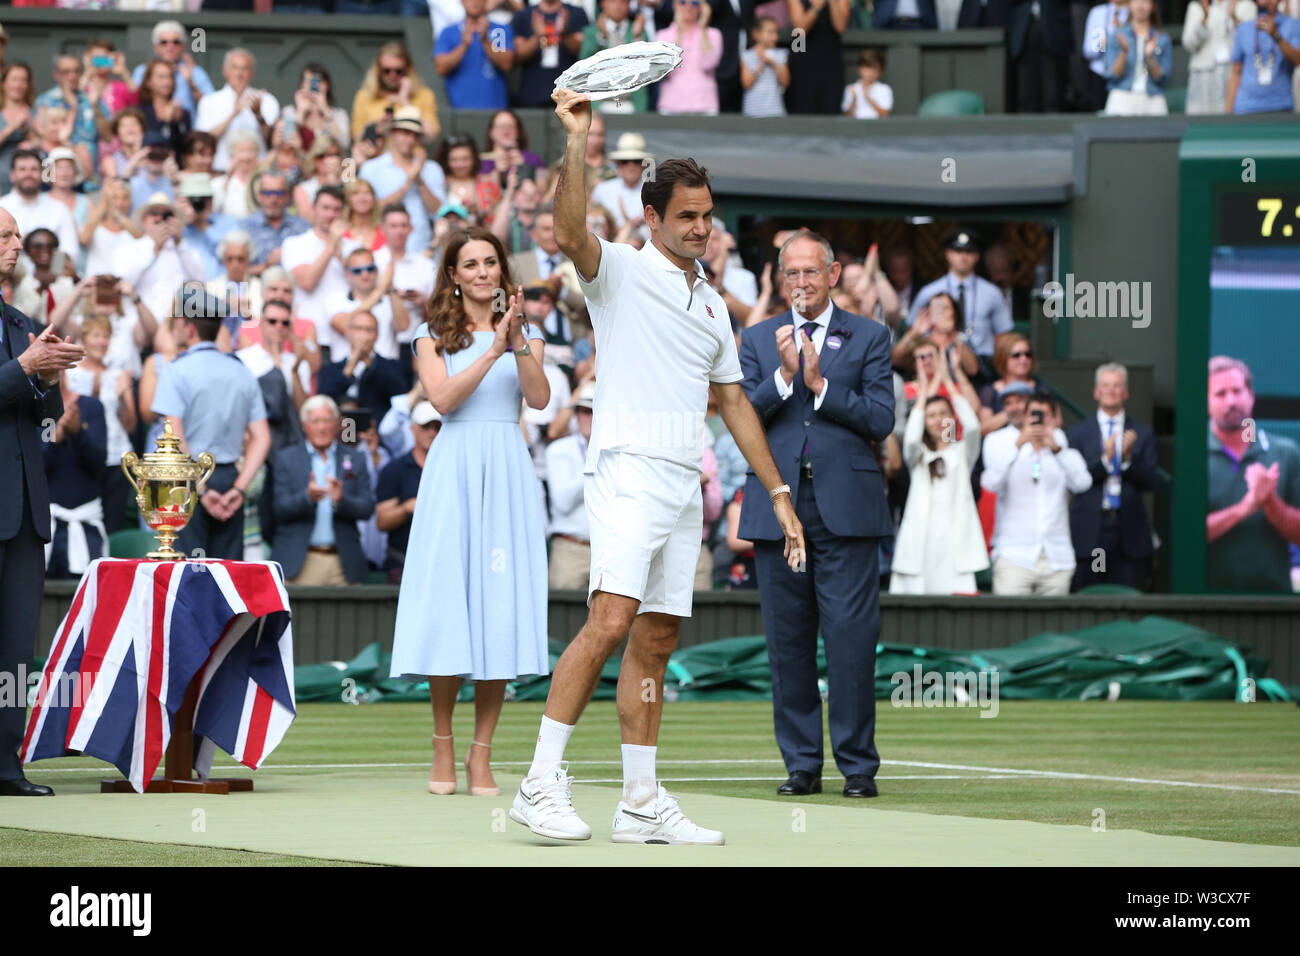 Wimbledon, London, UK. 14th July 2019. Roger Federer of Switzerland waves  to the fans during the trophy ceremony after the men's singles final match  of the Wimbledon Lawn Tennis Championships against Novak